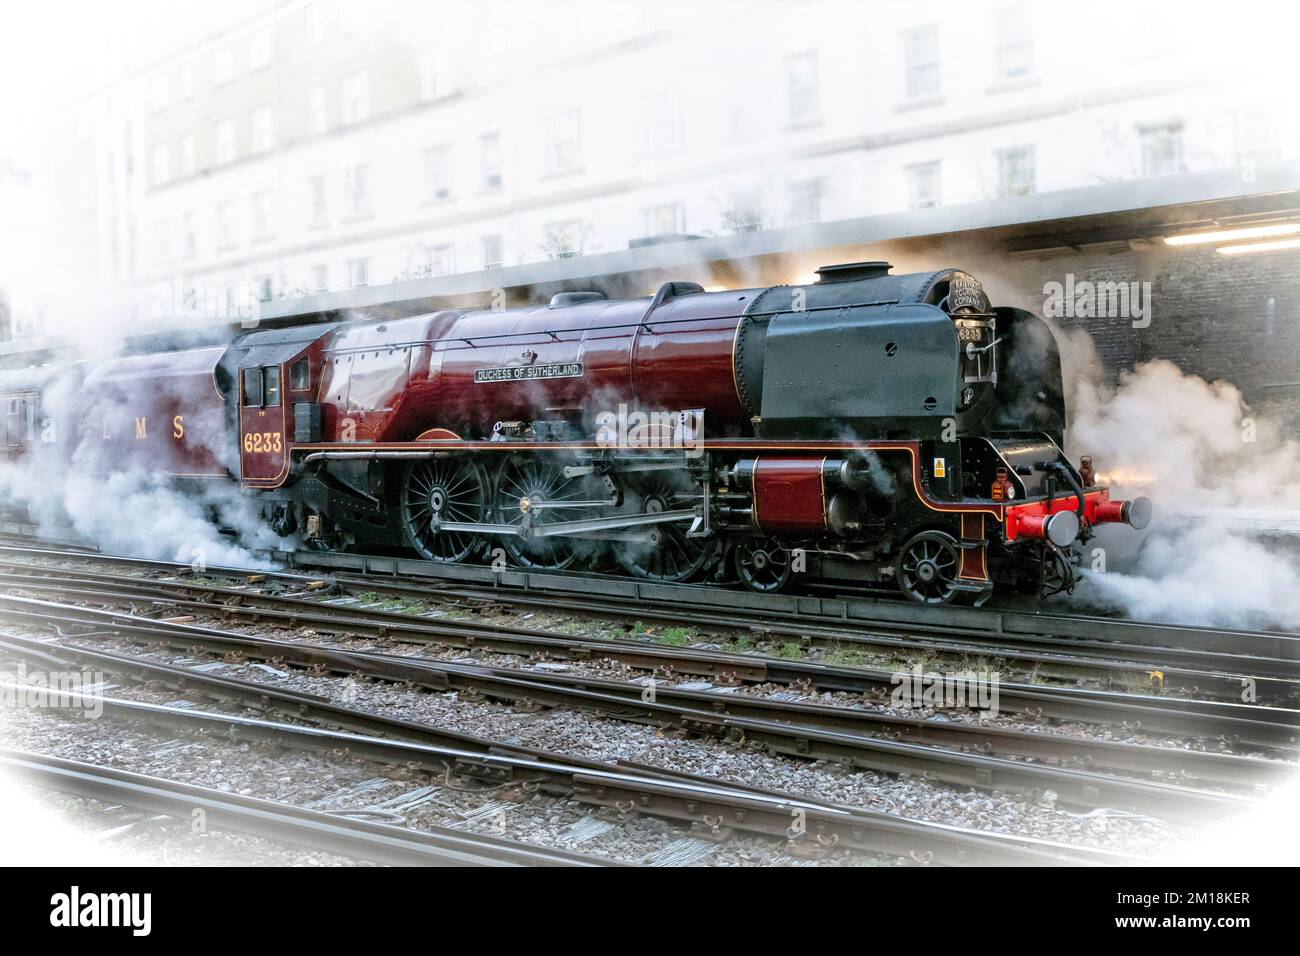 Railway Touring Company's Bath & Bristol Christmas Market express, at Victoria Station London.Pulled by Duchess of Sutherland LMS steam locomotive Stock Photo